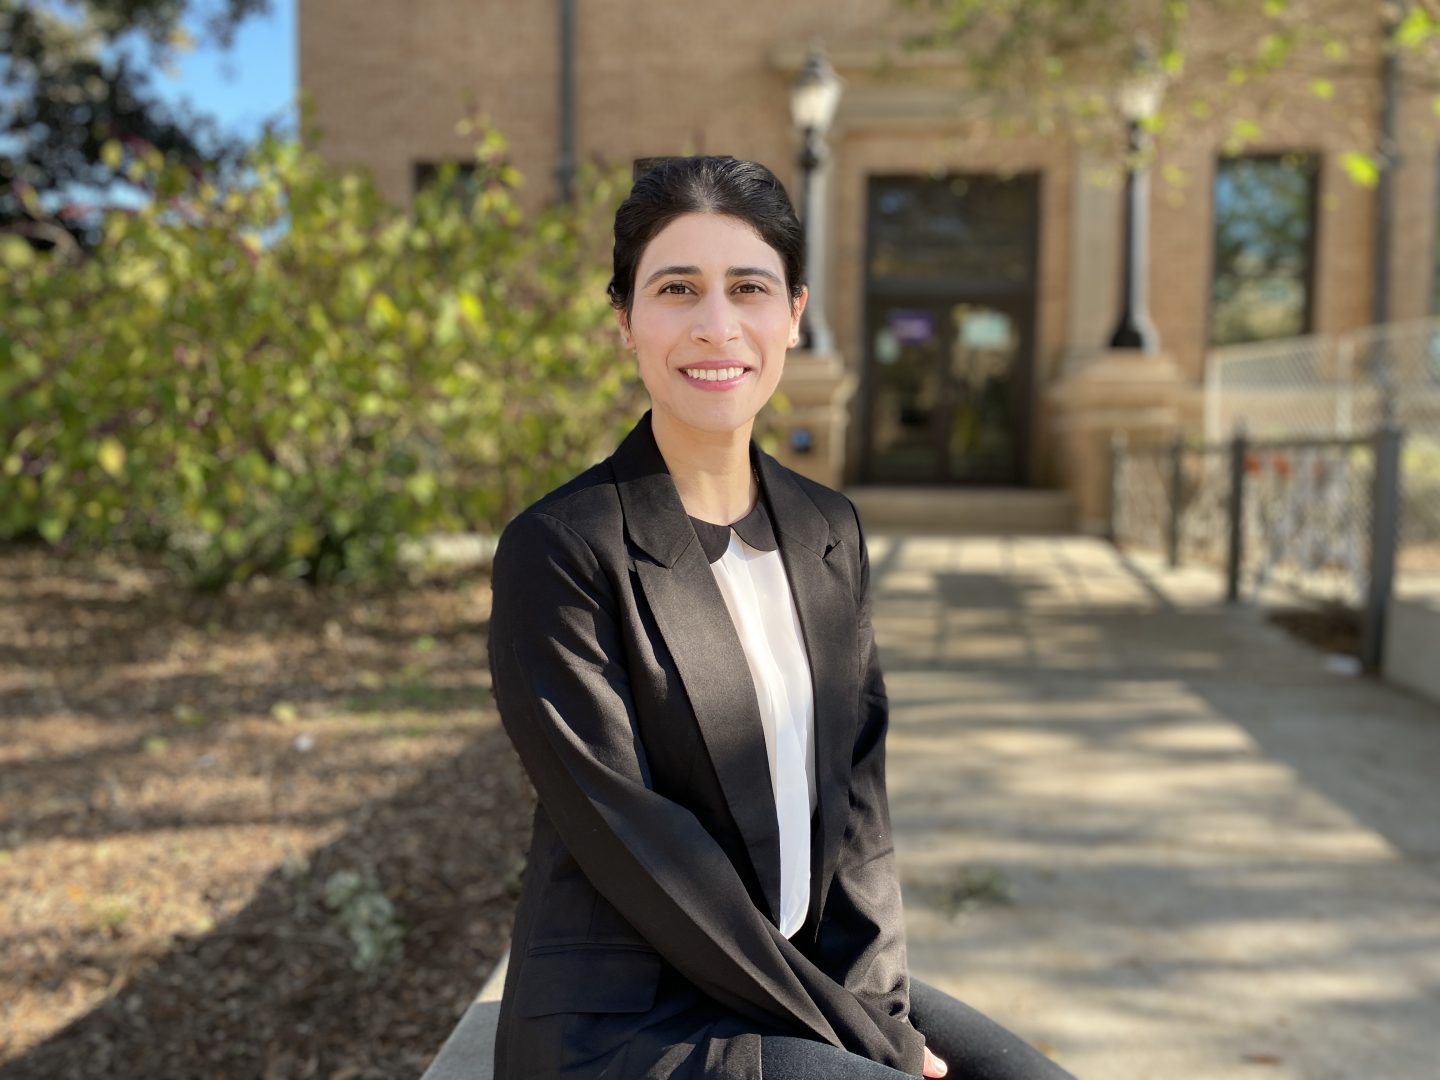 Nabiha sitting outside in front of a landscaped building entrance. She is smiling and wearing a black blazer and white button down shirt.